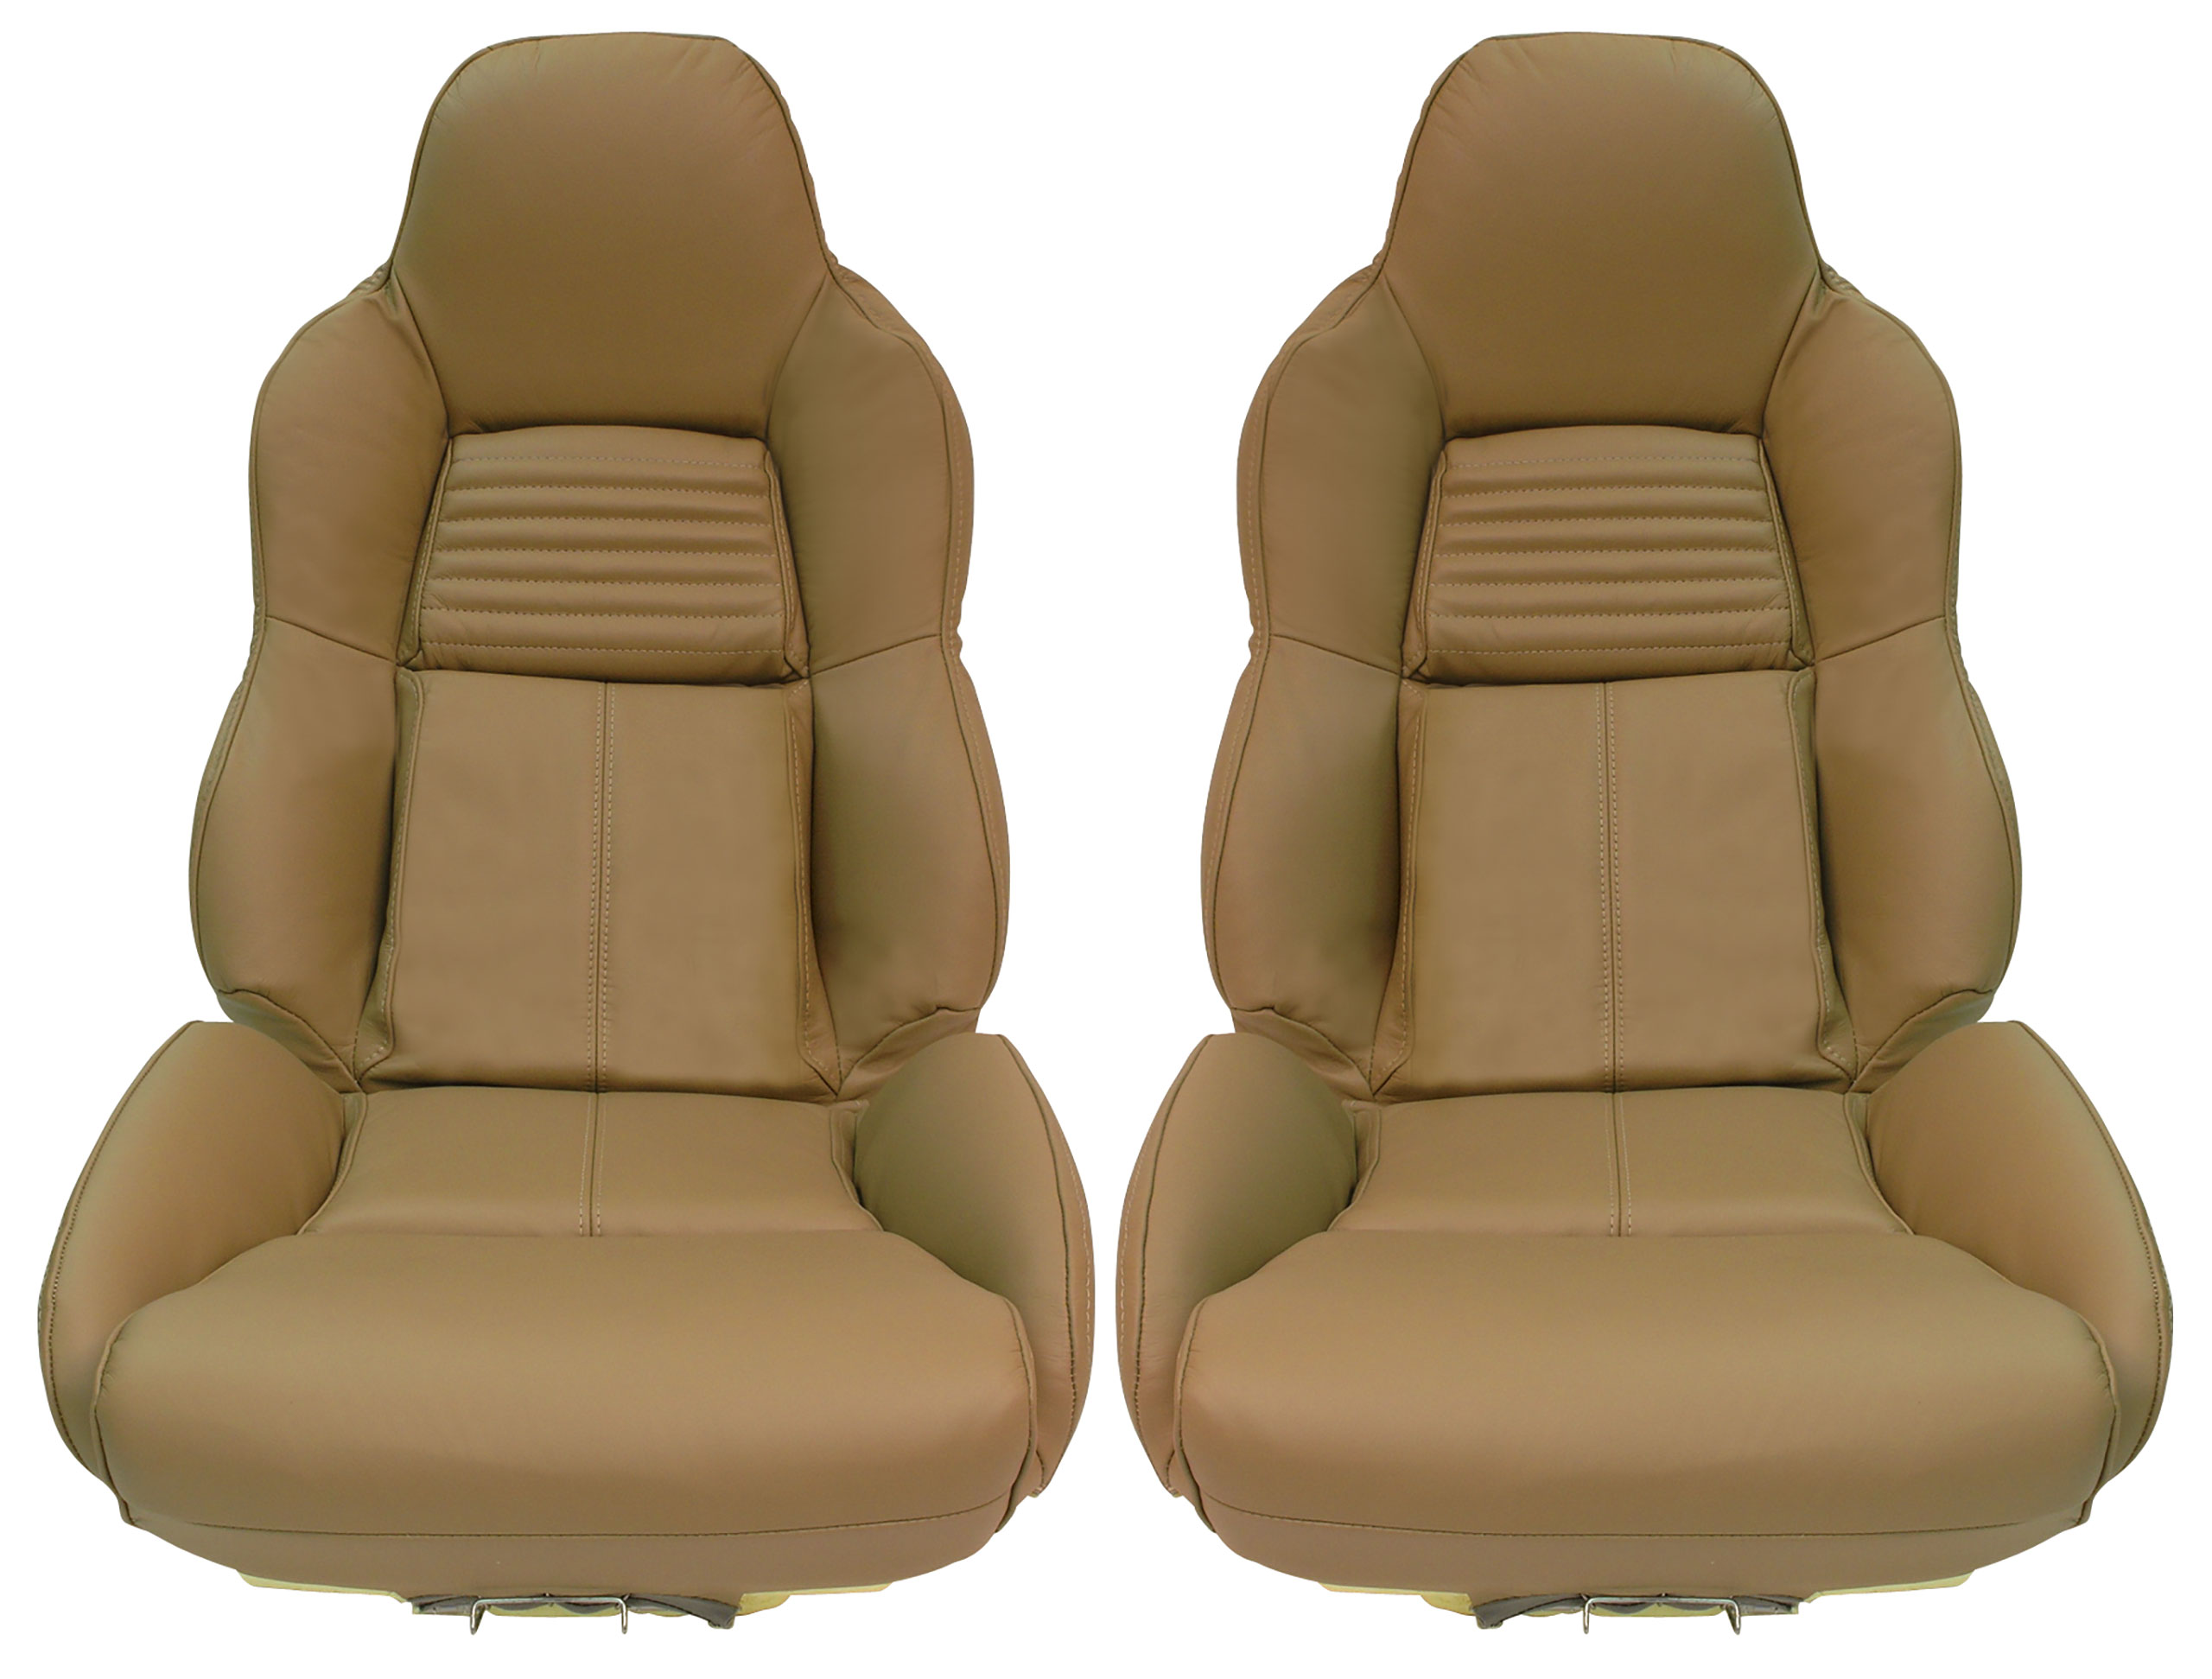 1994-1996 C4 Corvette Mounted Leather Seat Covers Beige Standard